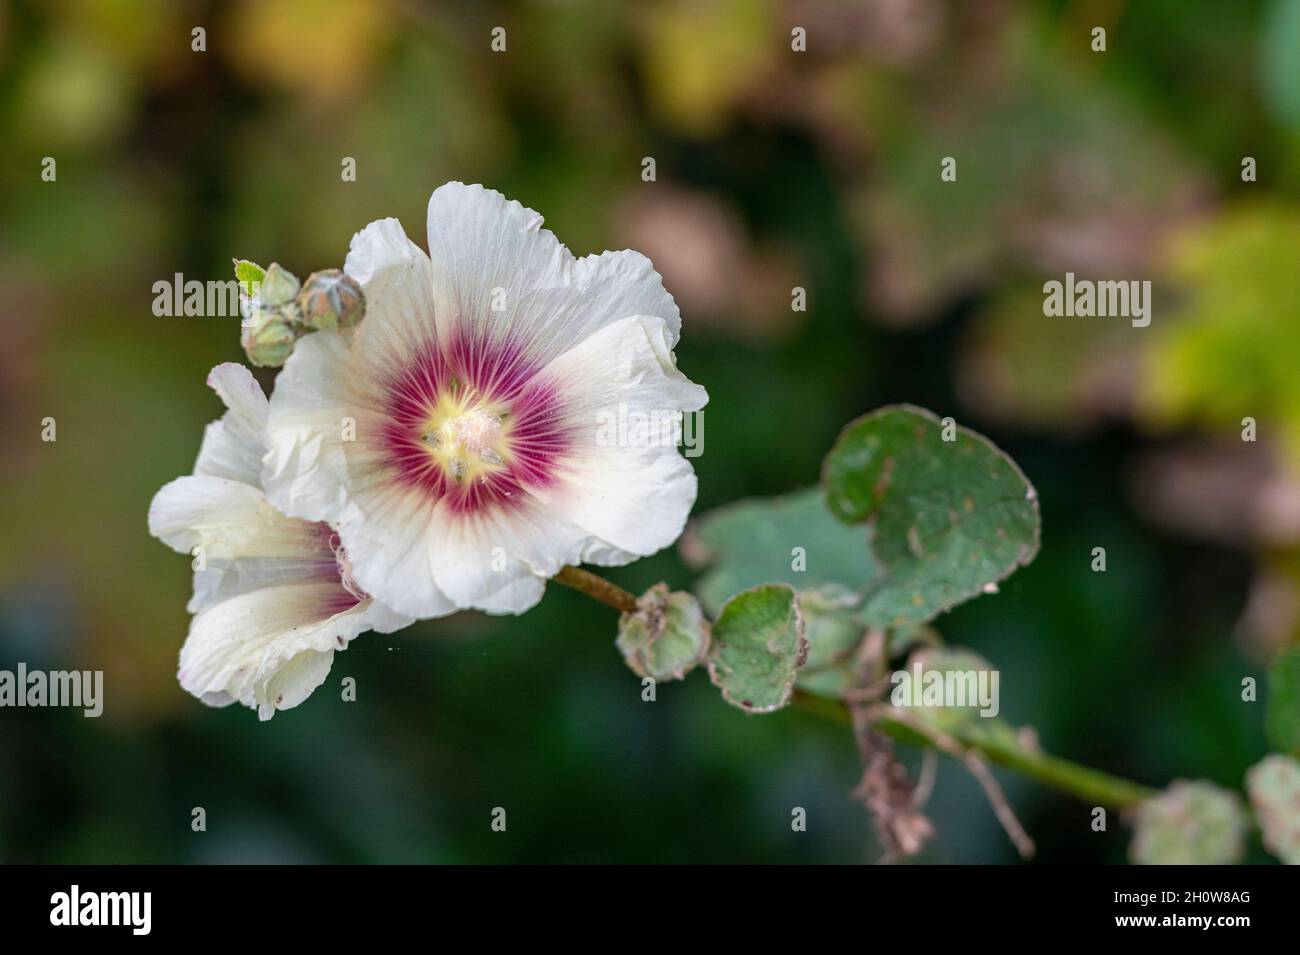 alamo vine plant with white petals and red ring radiating outwards from the stamen or stem. Stock Photo